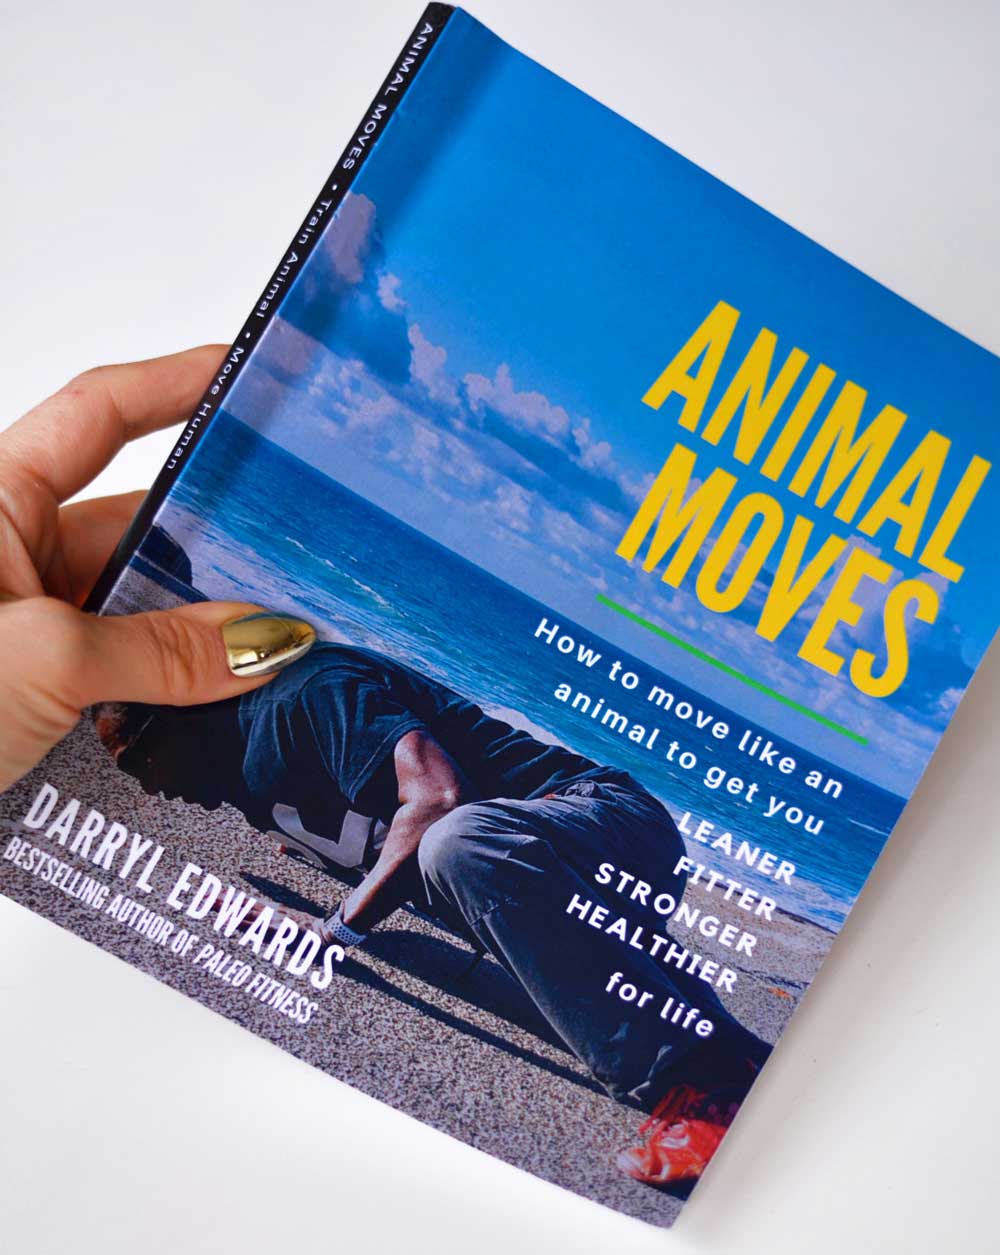 Animal Moves Book Review (Greens Of The Stone Age)